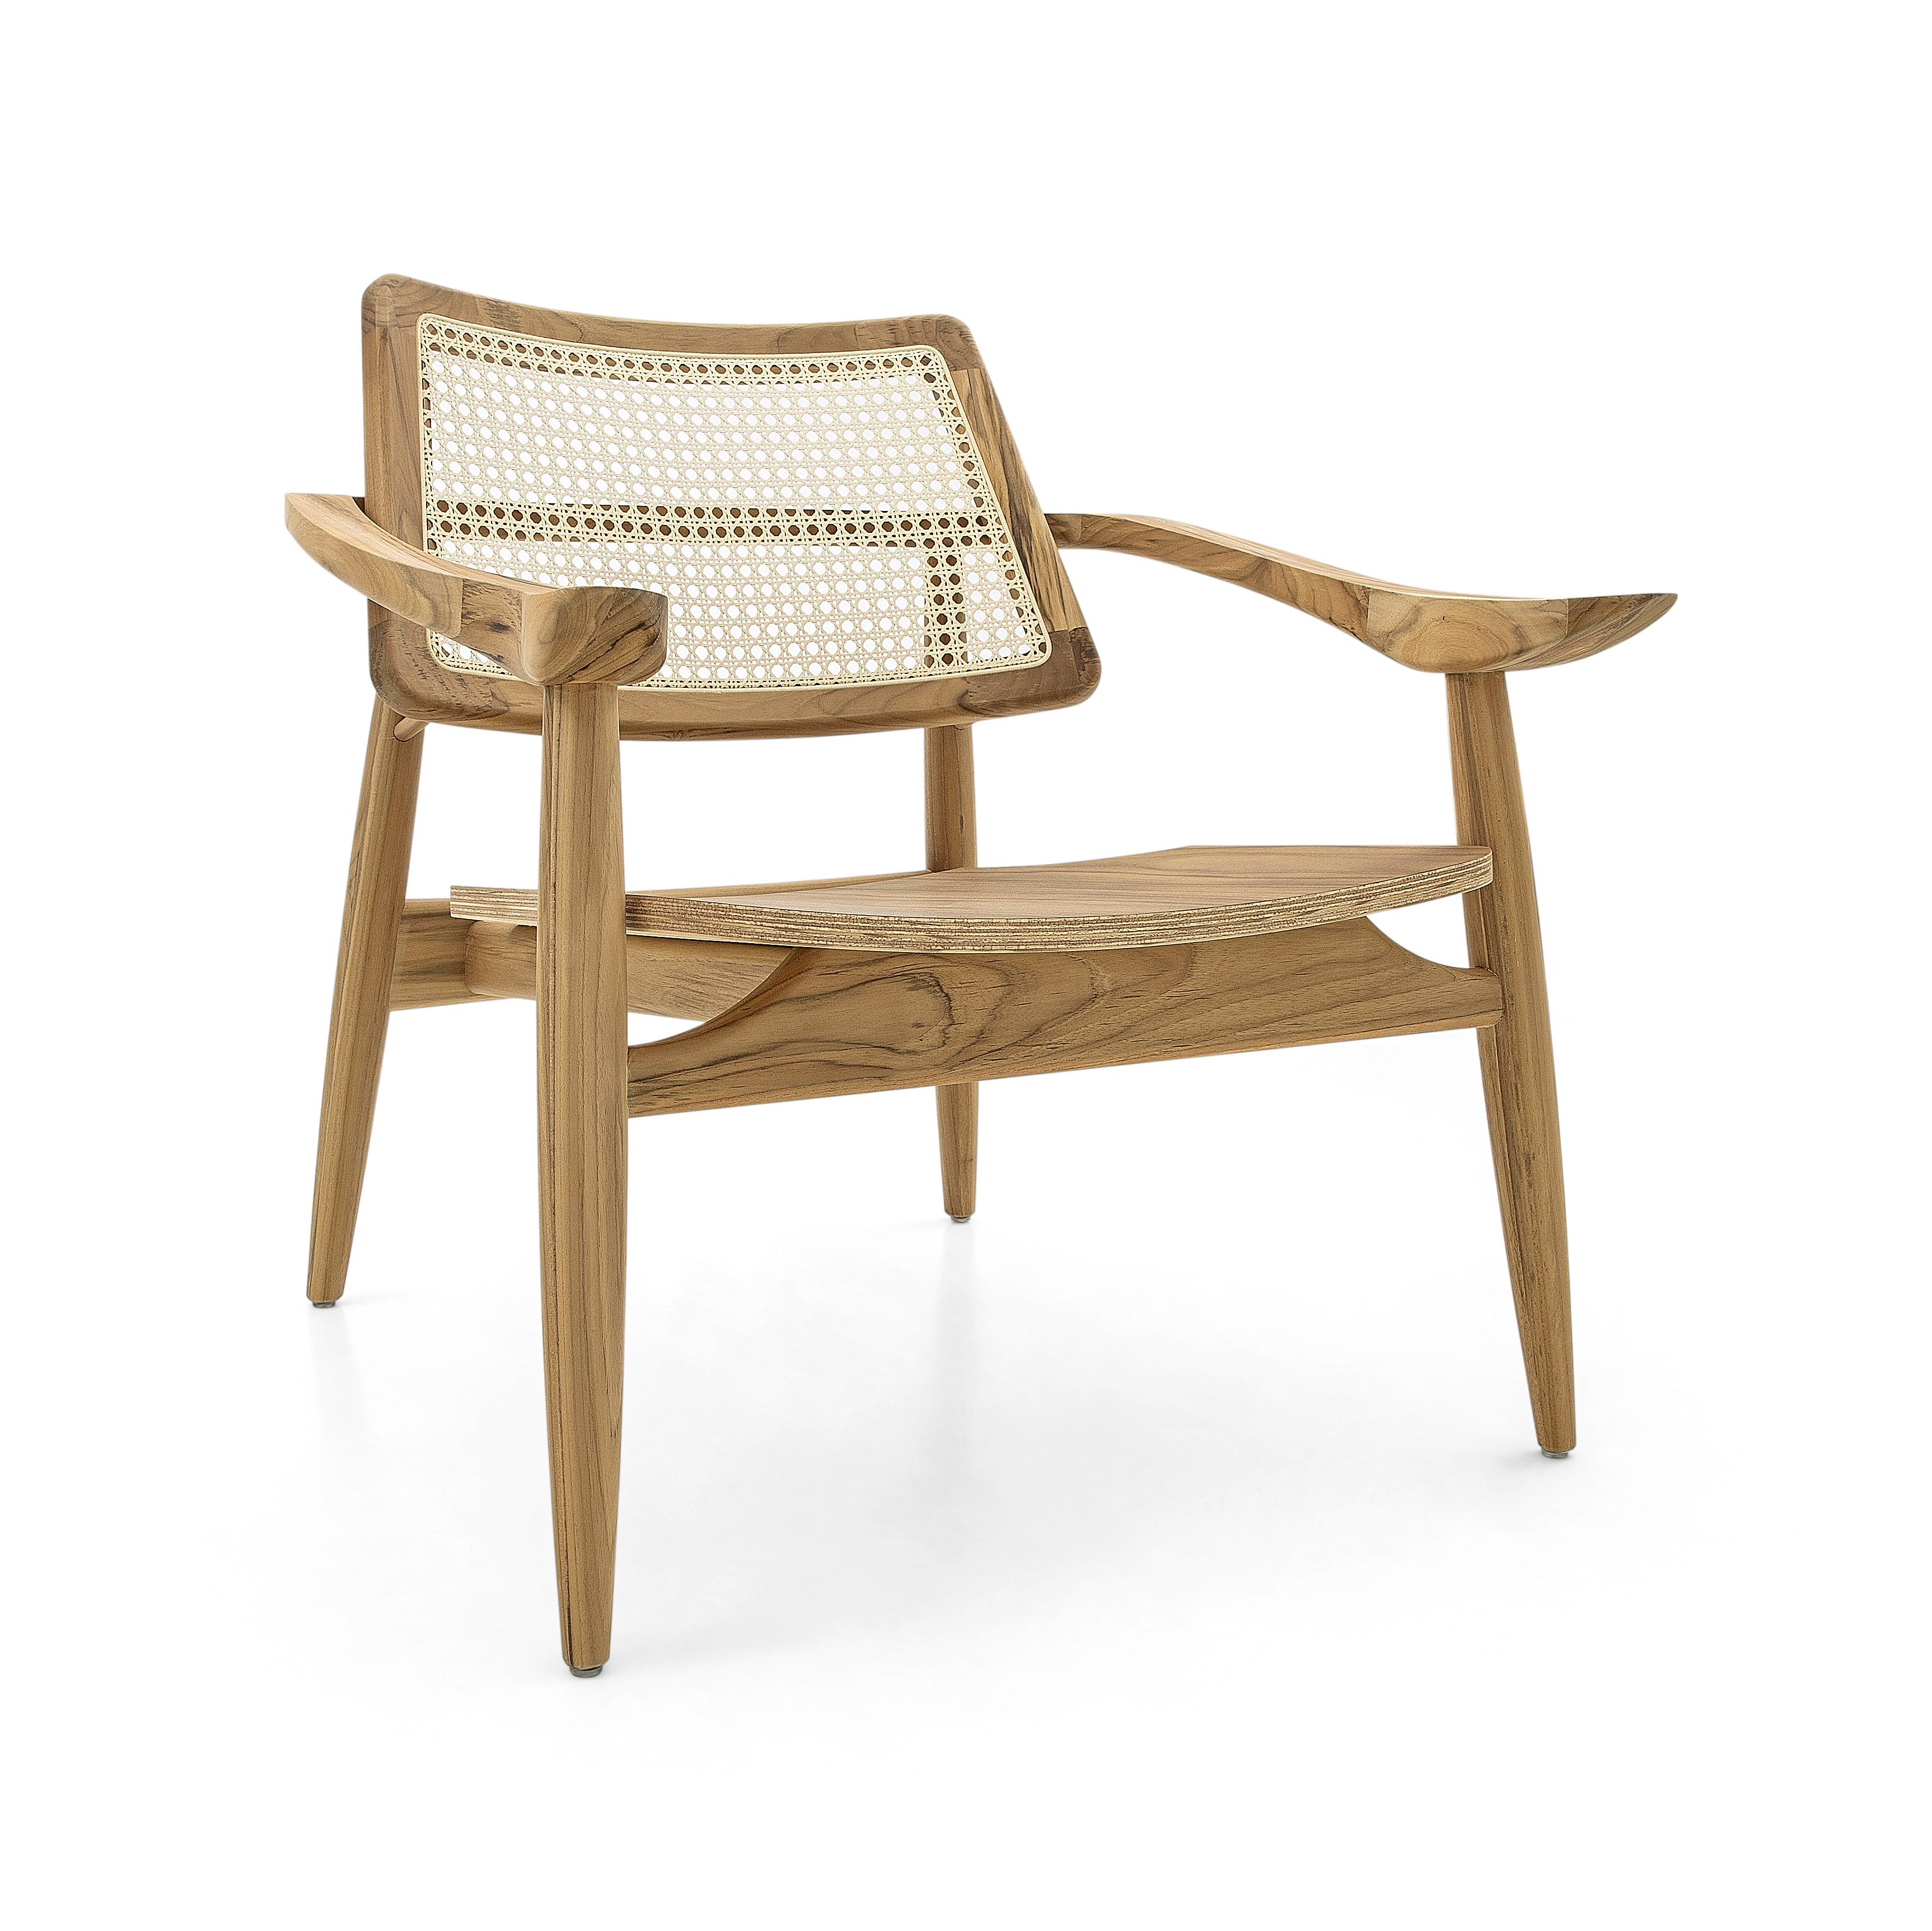 Contemporary Turn Armchair Cane-Back Chair with Shaped Wooden Seat in Teak Wood Finish For Sale